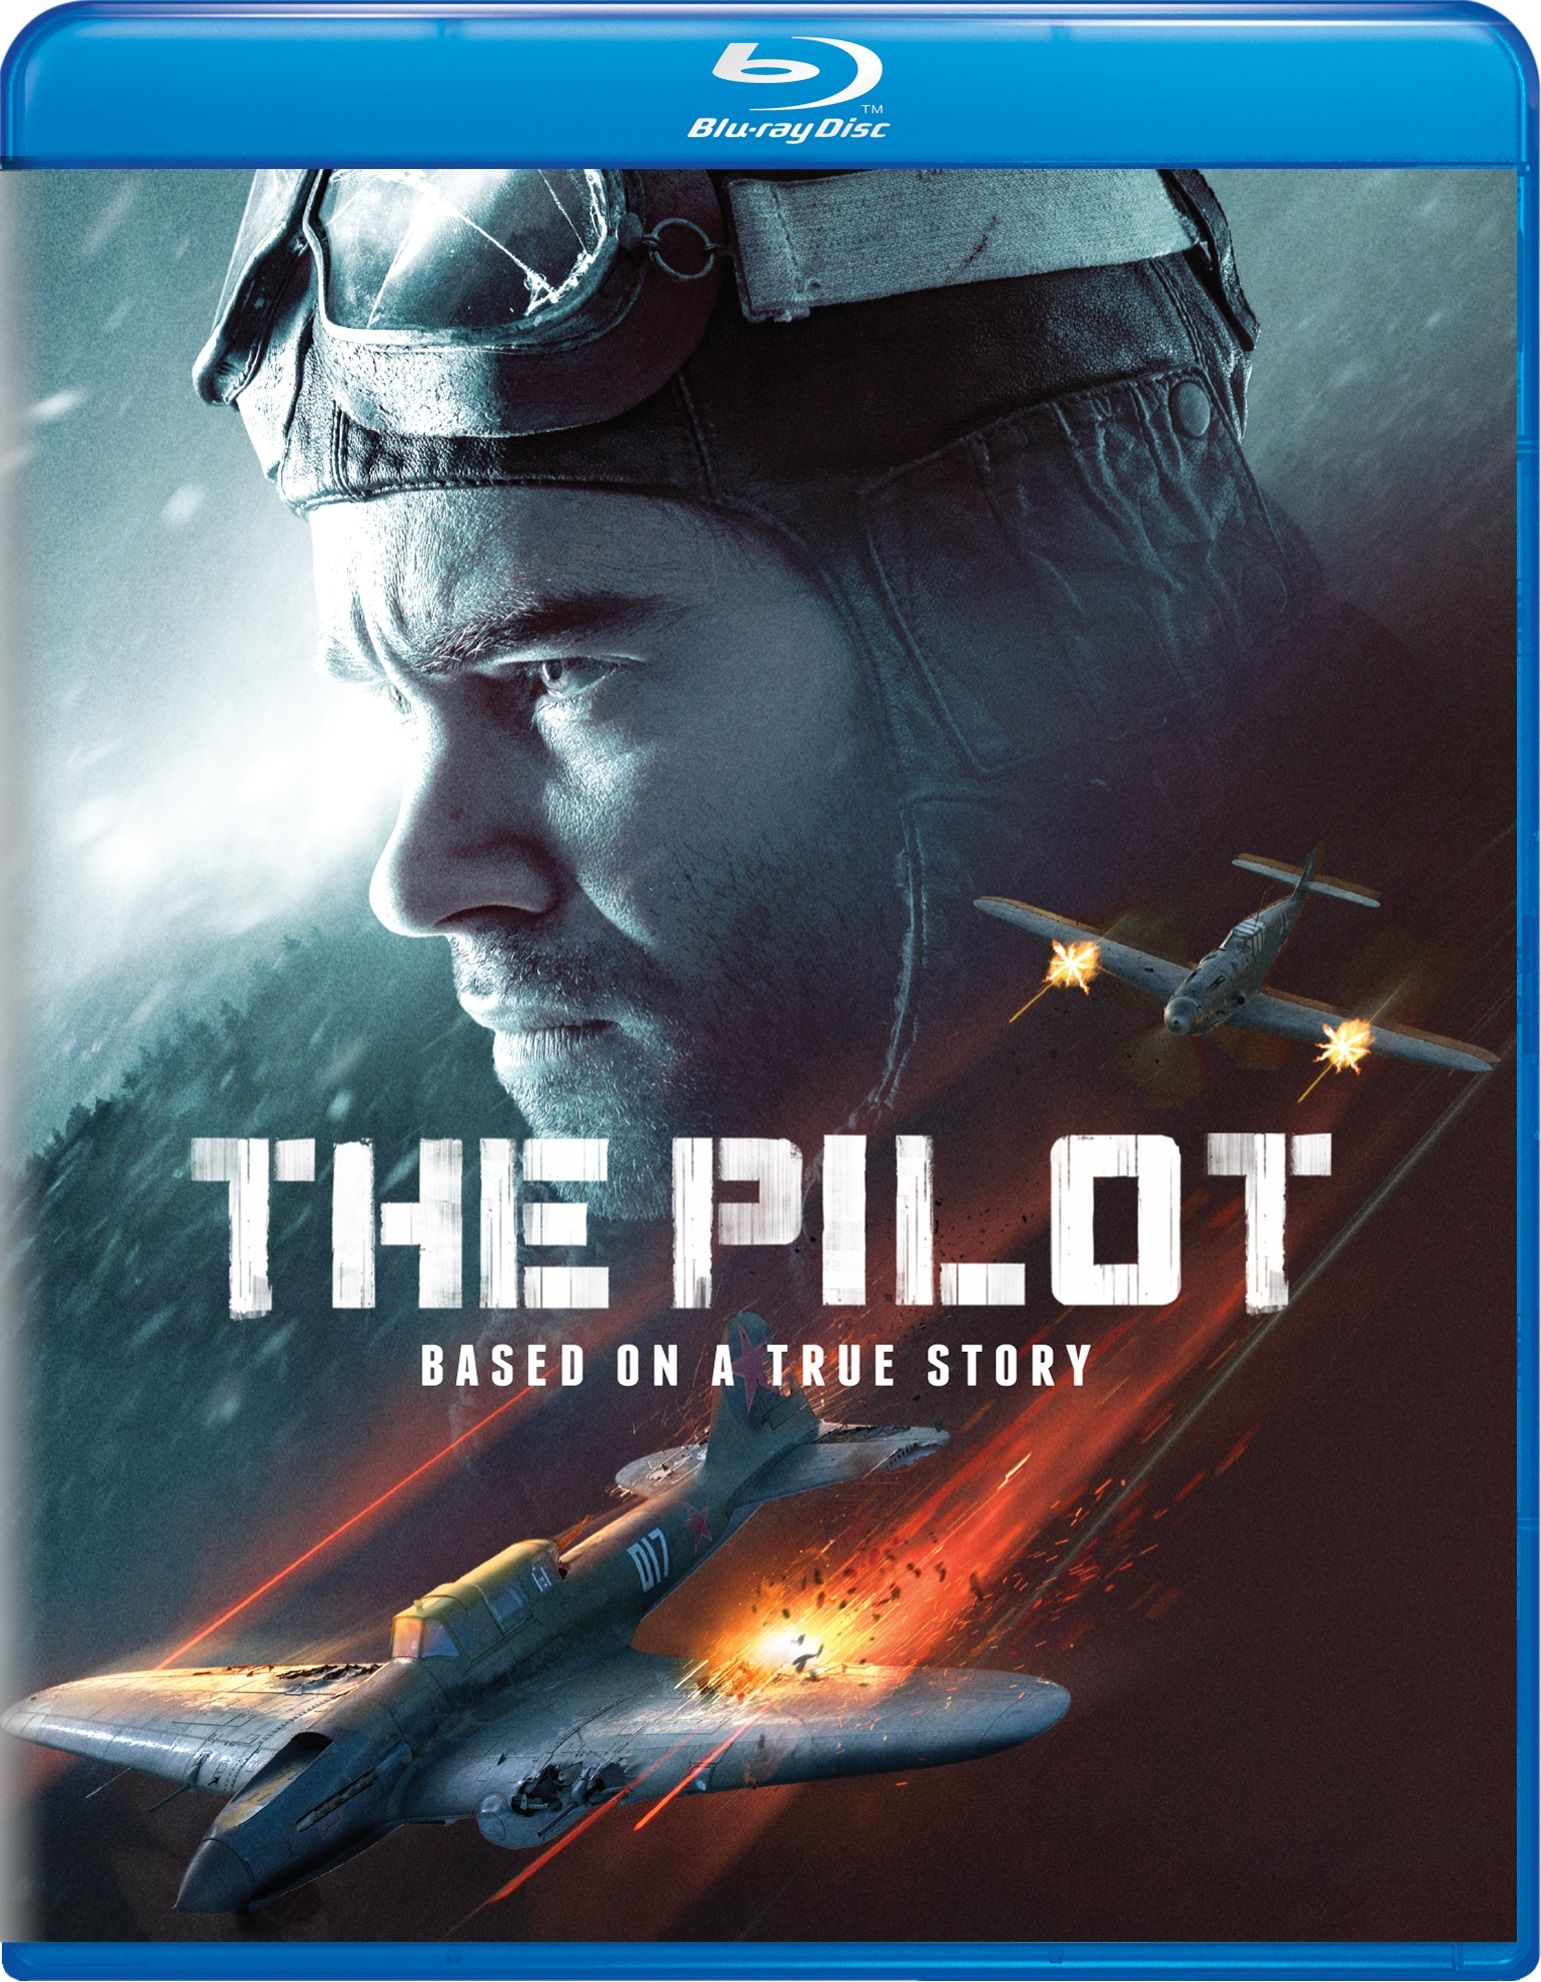 The Pilot: A Battle For Survival - Blu-ray [ 2021 ]  - Action Movies On Blu-ray - Movies On GRUV